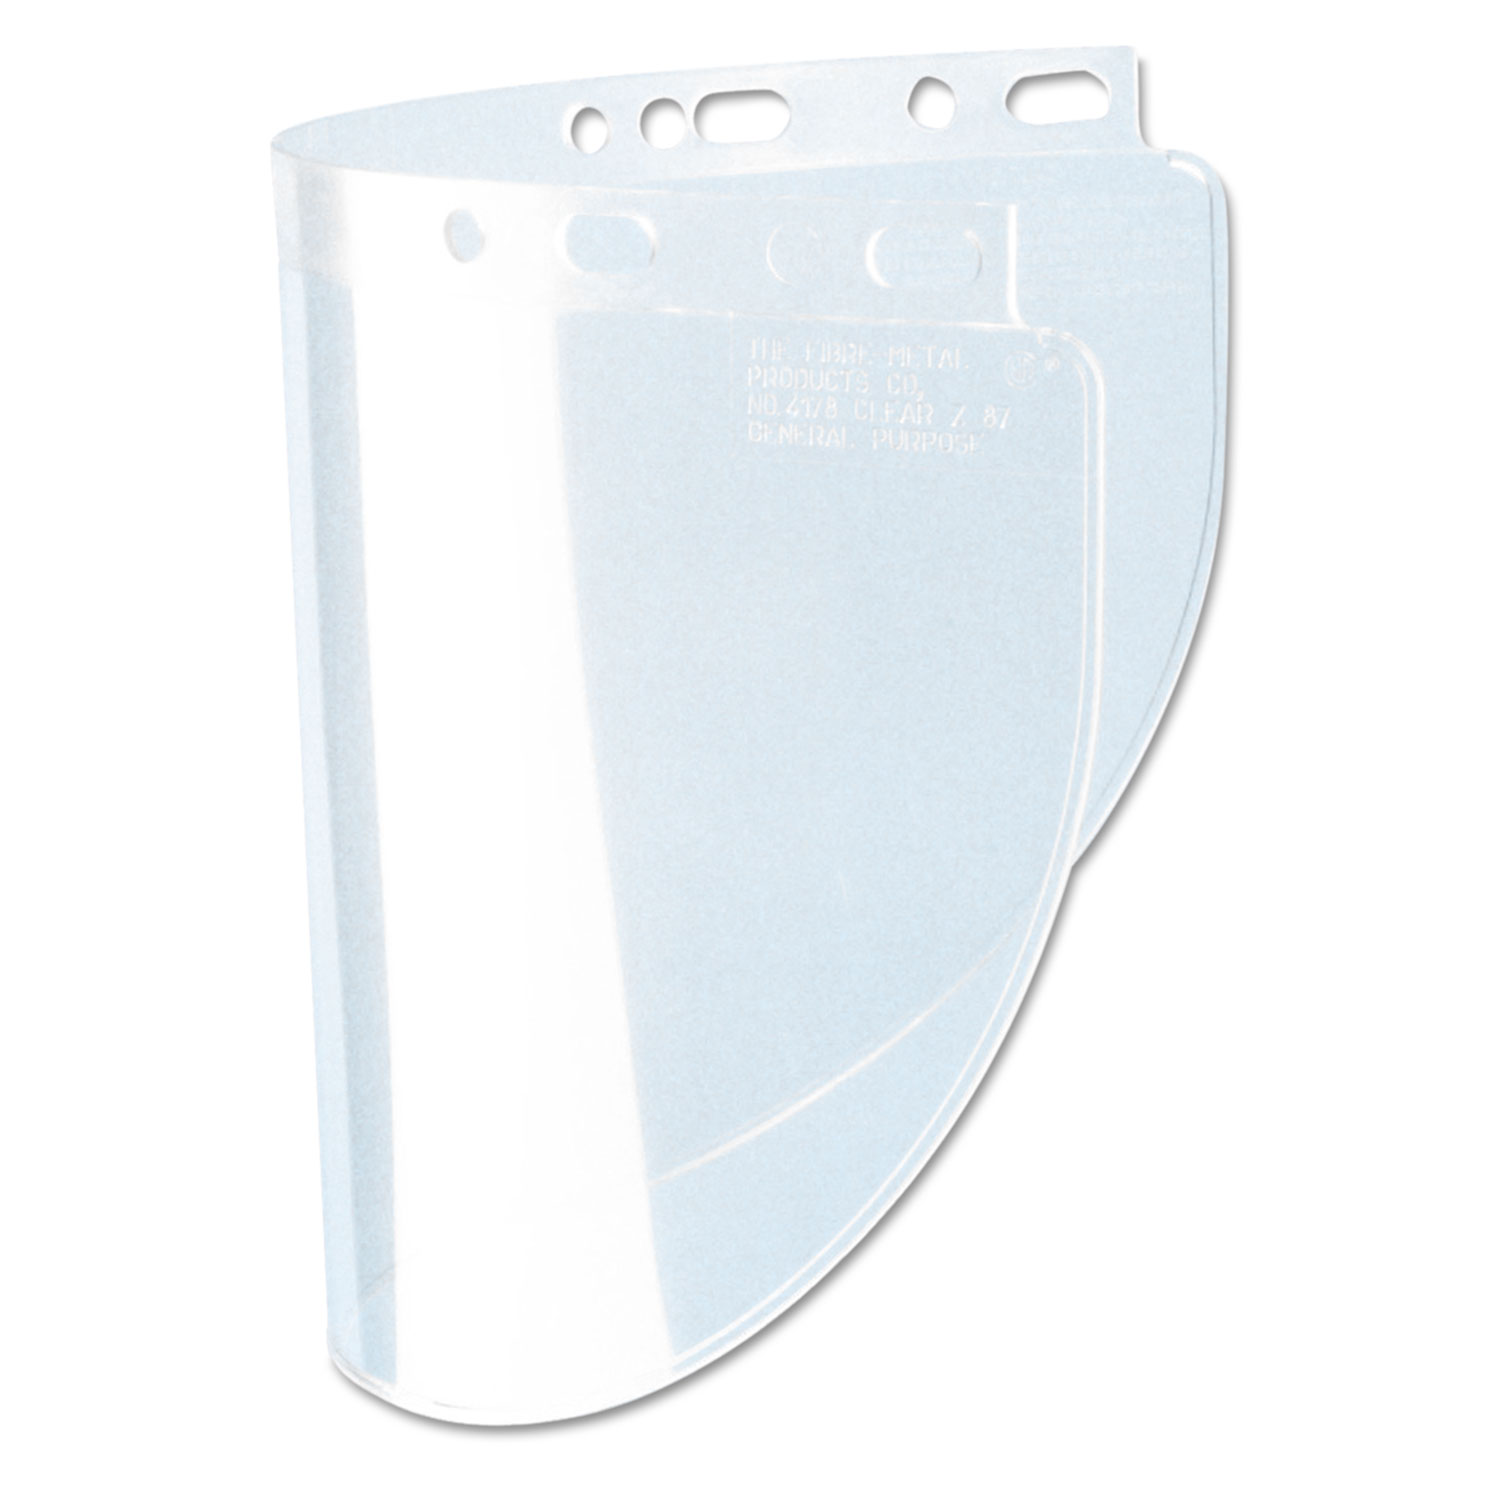  Fibre-Metal by Honeywell 4118CL High Performance Face Shield Window, Standard, Propionate, Clear (FBR4118CL) 